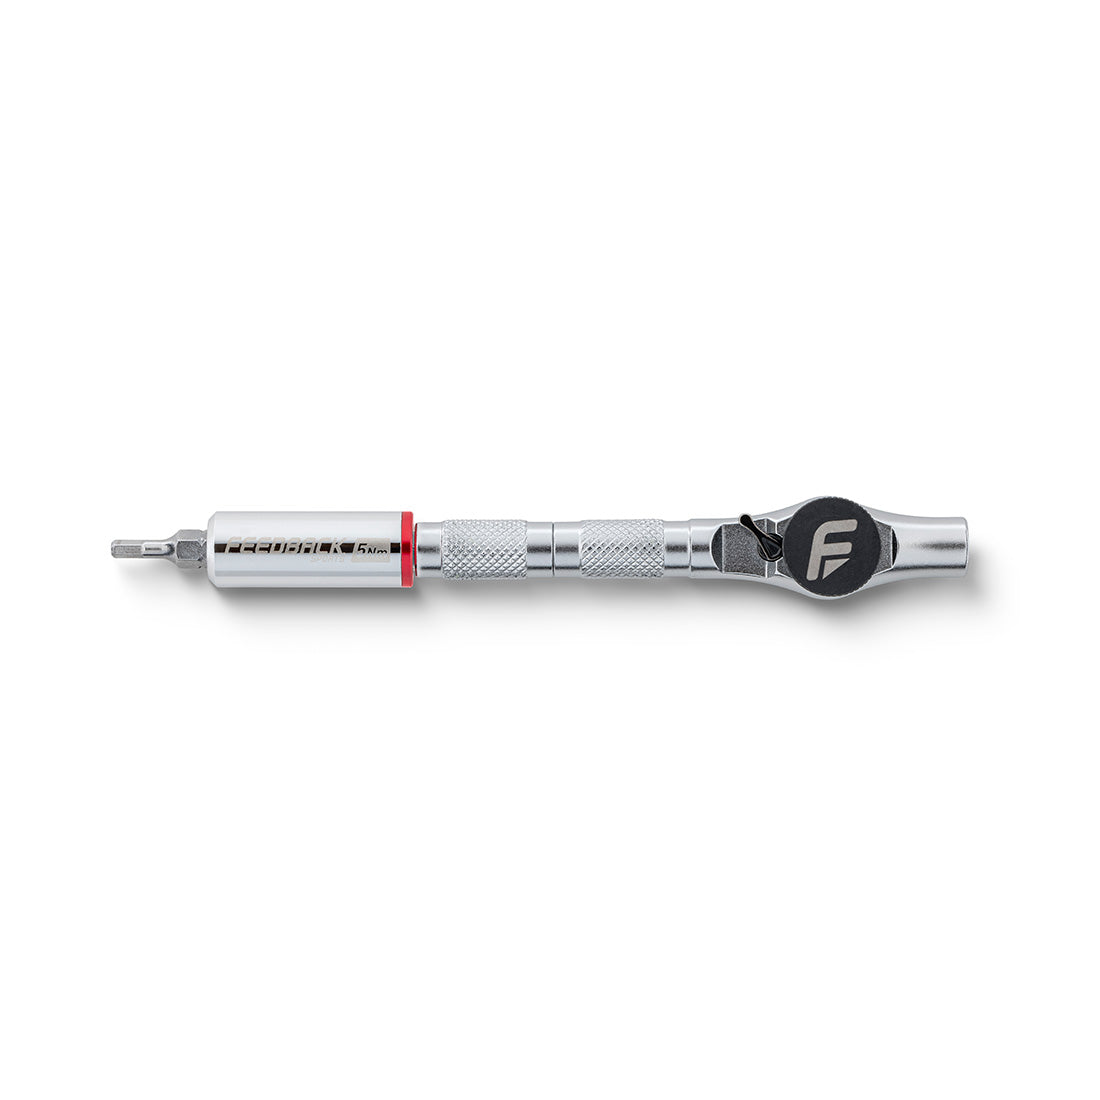 feedback sports reflex fixed torque ratchet kit in one of its many modular forms